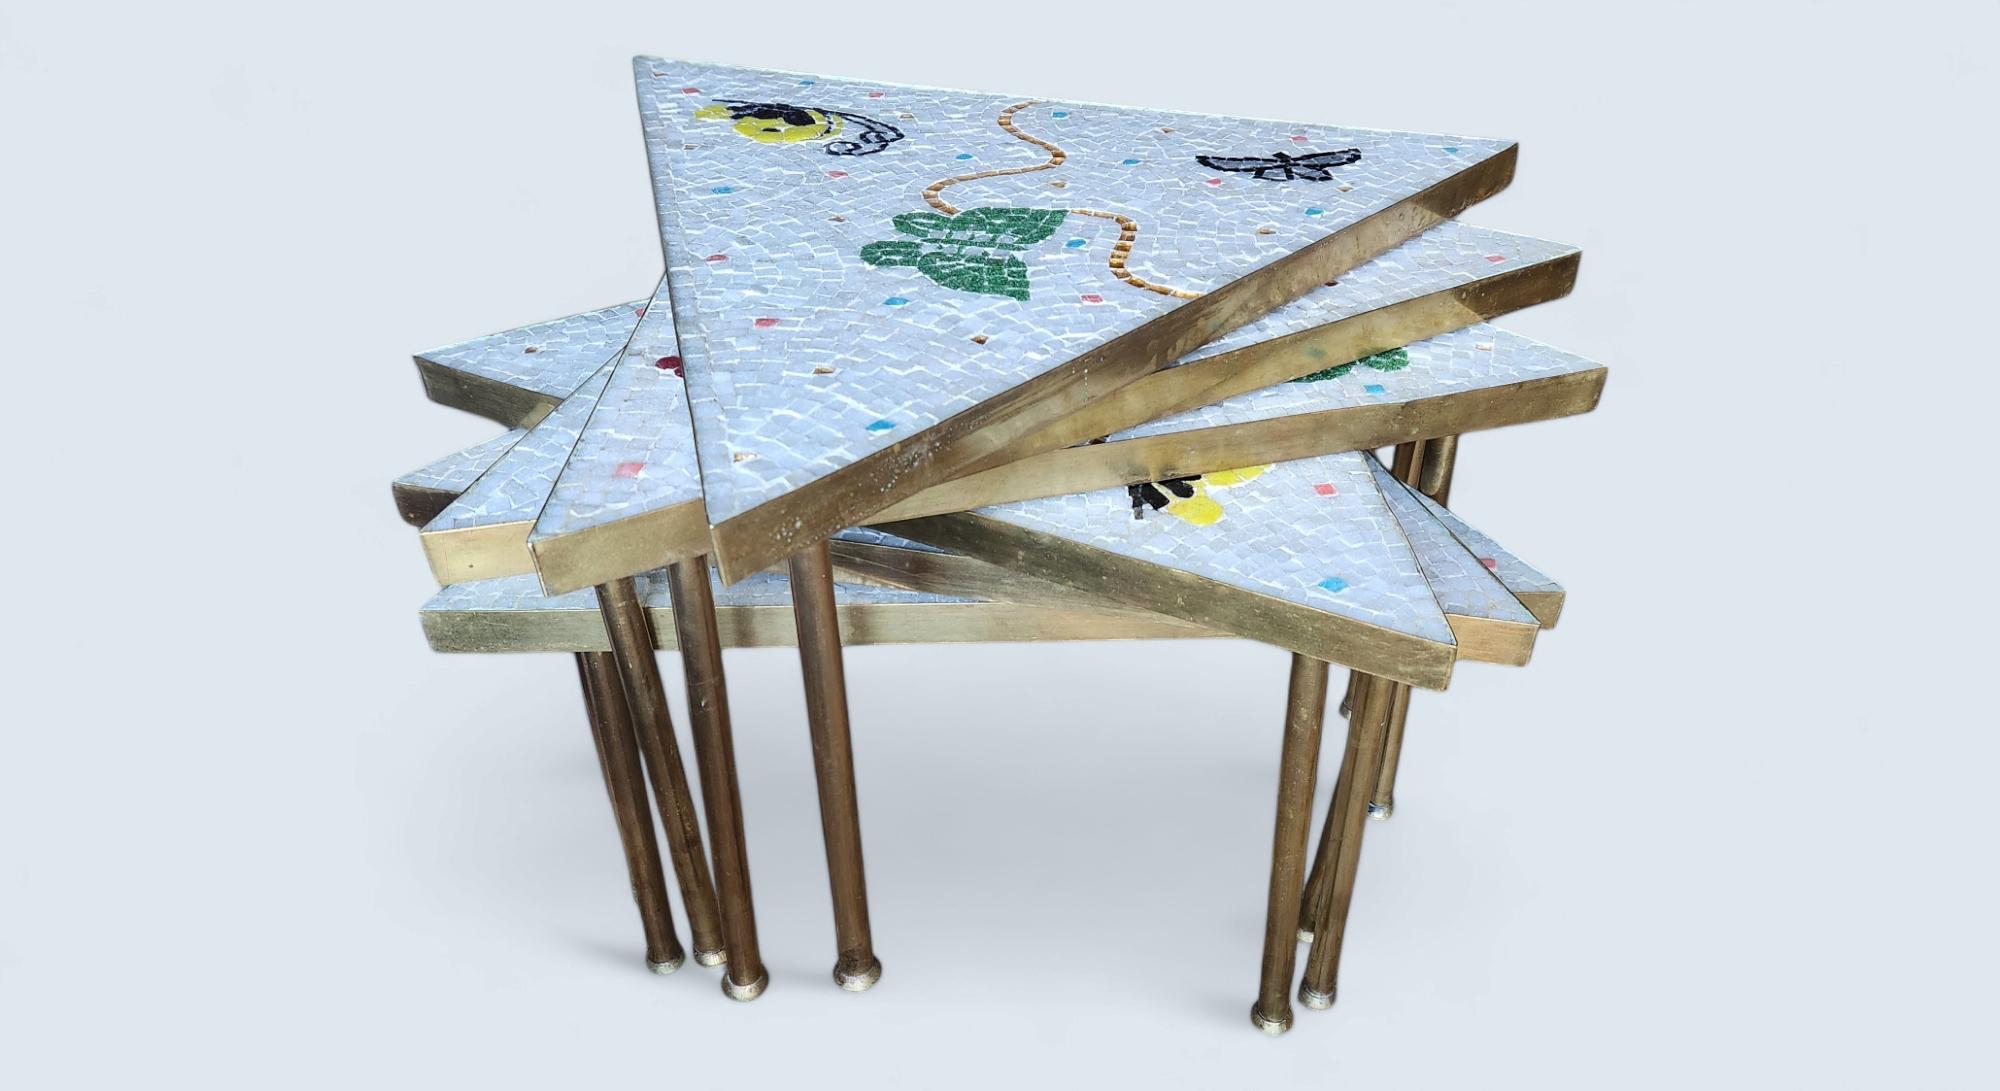 Six Piece Studio Mosaic table by Genaro Alvarez composed of intricate inlaid glass mosaic designs of 6 butterflies, on six triangular, interchangeable mahogany bases created at the Genaro Alvarez's Studio in Mexico City in the 1950s.
Alvarez studied